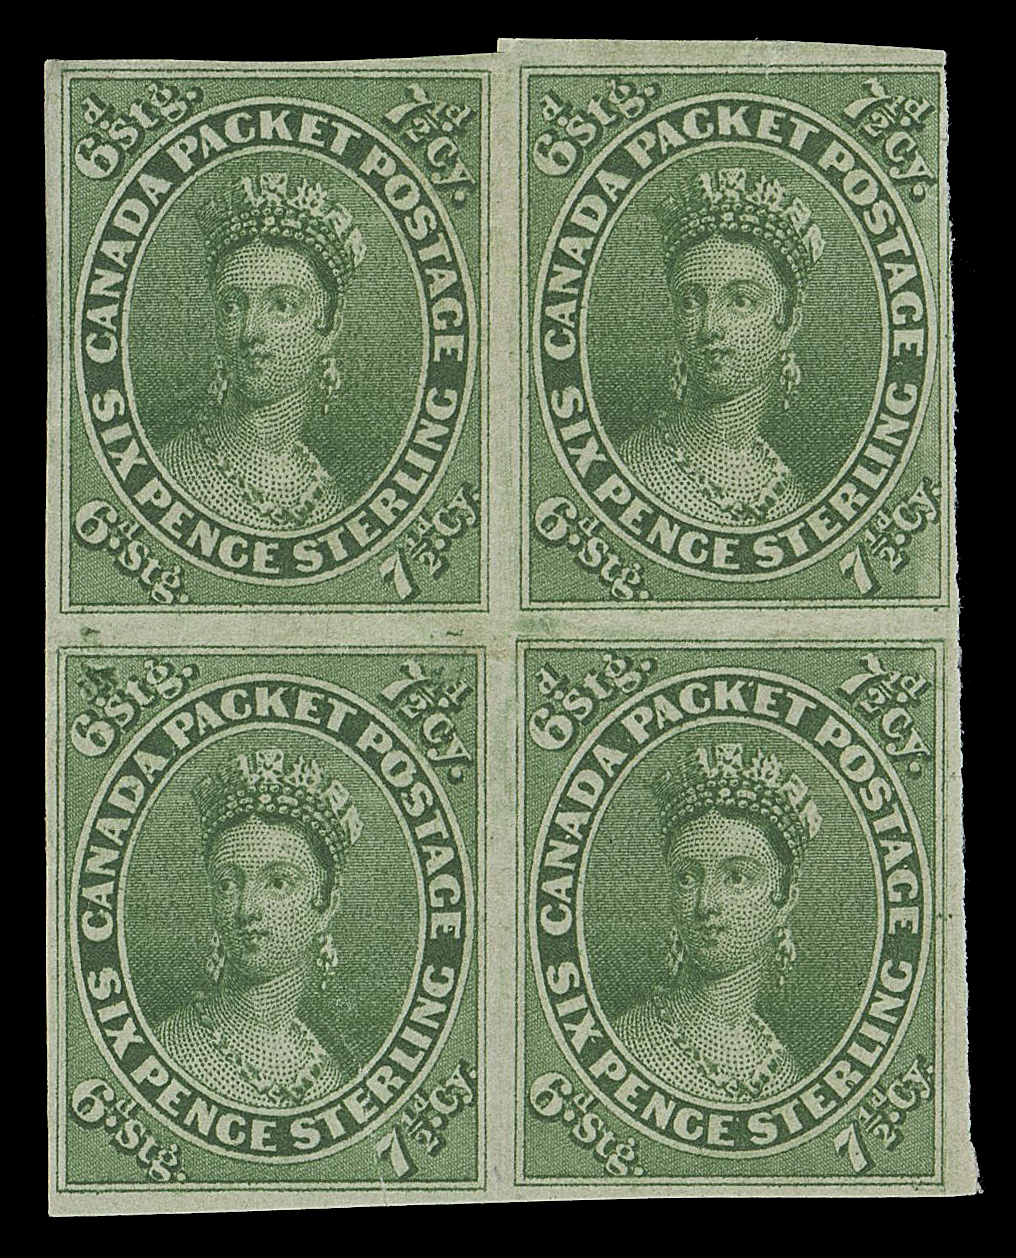 SEVEN AND ONE HALF PENCE AND TWELVE AND ONE HALF CENTS  9,The phenomenal, famous block of four, displaying with ample to large margins, top right outer frameline just touched, sealed tear at foot of lower left stamp. An exceptionally fresh block, displaying its original "bloom" as the day it was printed more than 160 years ago. Remarkably retaining full original gum, relatively lightly hinged, the lower right stamp appears to be NEVER HINGED. One of the Aristocrats of Canadian Philately, Very Fine, Lightly Hinged

The lower left stamp shows the "1d Flaw Fraction - Triangle Flaw" (Position 47) with a prominent Misplaced Entry in upper corner "6½dstg - 7½dcy" values (Unitrade 9iv).

Provenance: General Robert Gill, Robson Lowe Ltd., October 1965; Lot 41 - the third highest realization after the mint 12p pair and 10p block. Robson Lowe mentions in an article titled "Some Remarkable Stamps" published in 1965 and describes: "some of these unique unused blocks came from a collection found in the archives of a noble French family some 20 years ago. These were unearthed for the first time since the stamps had arrived in France. The blocks that are now in the Gill collection are the only ones that have ever been seen." This noble French family has been revealed as the Duc de Polignac who originally purchased these blocks from the post office at Montreal, (around circa. 1859).
E. Carey Fox, First Portion H.R. Harmer Inc., May 1968; Lot 355
Duane Hilmer, Sotheby Parke Bernet Stamp Auction, September 1977; Lot 112 - described "famous unique block of four... Great Rarity of Canadian Philately."
John Foxbridge (du Pont) Collection (private treaty, 1988) - original retail value US$95,000.
The Weill Brothers, Christie